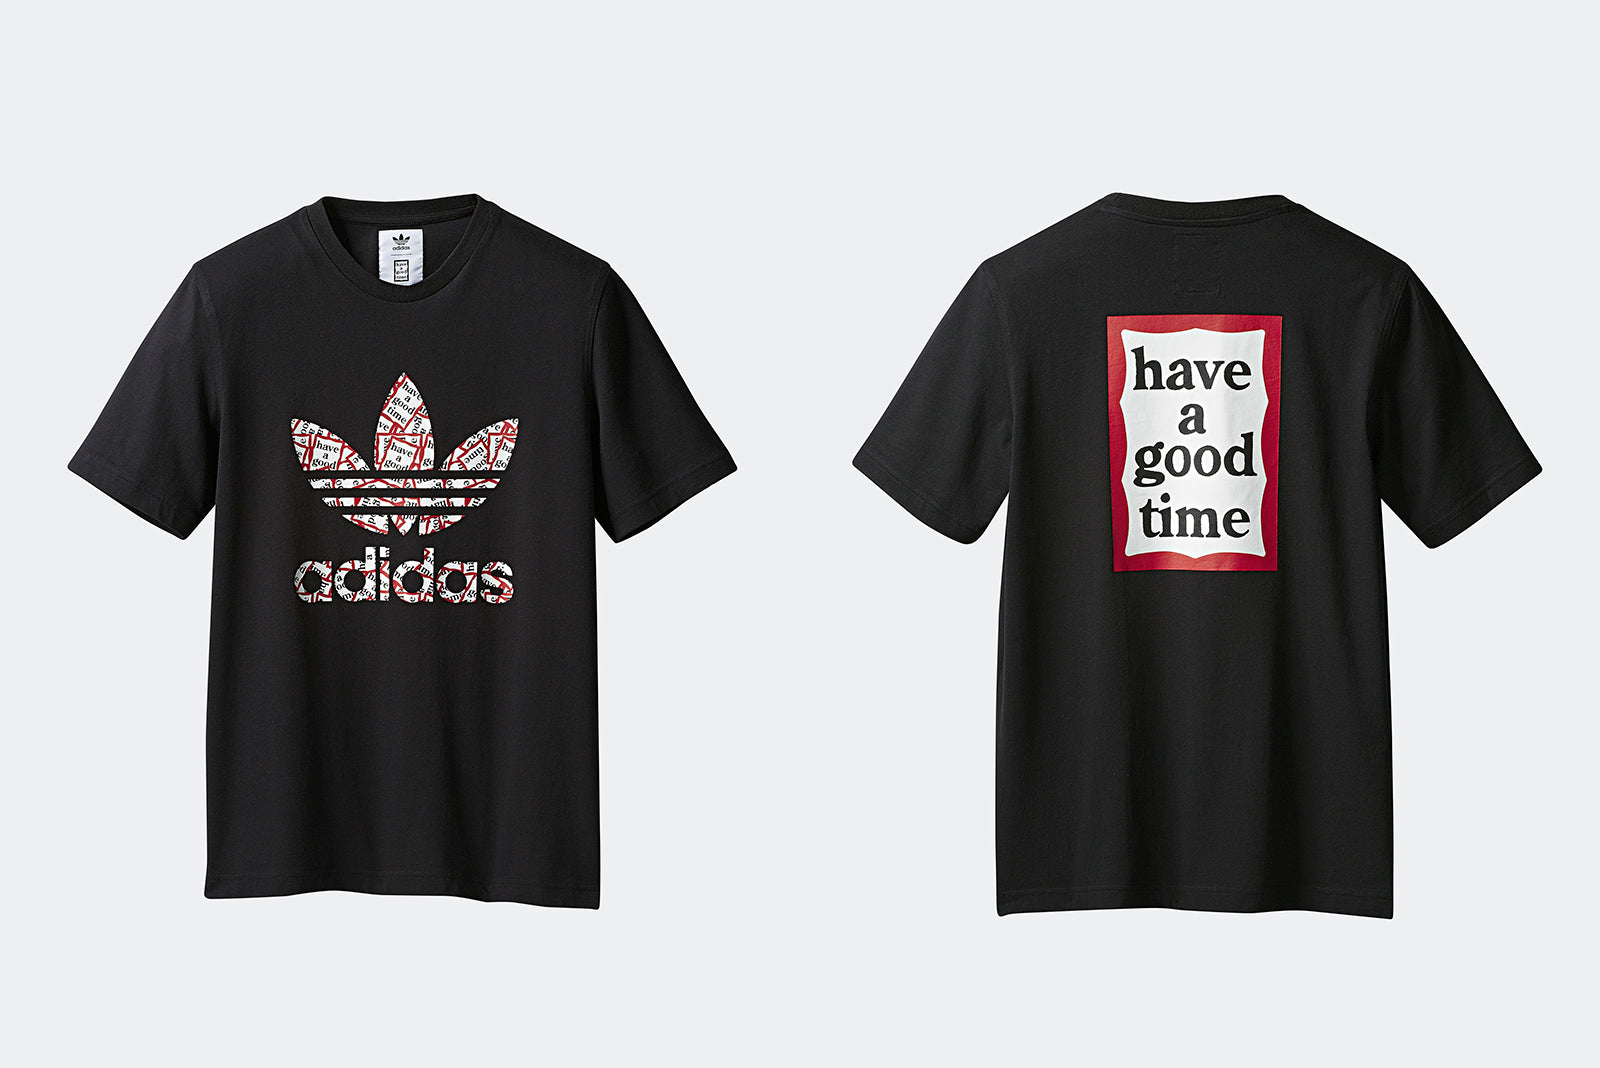 adidas have a good time tee